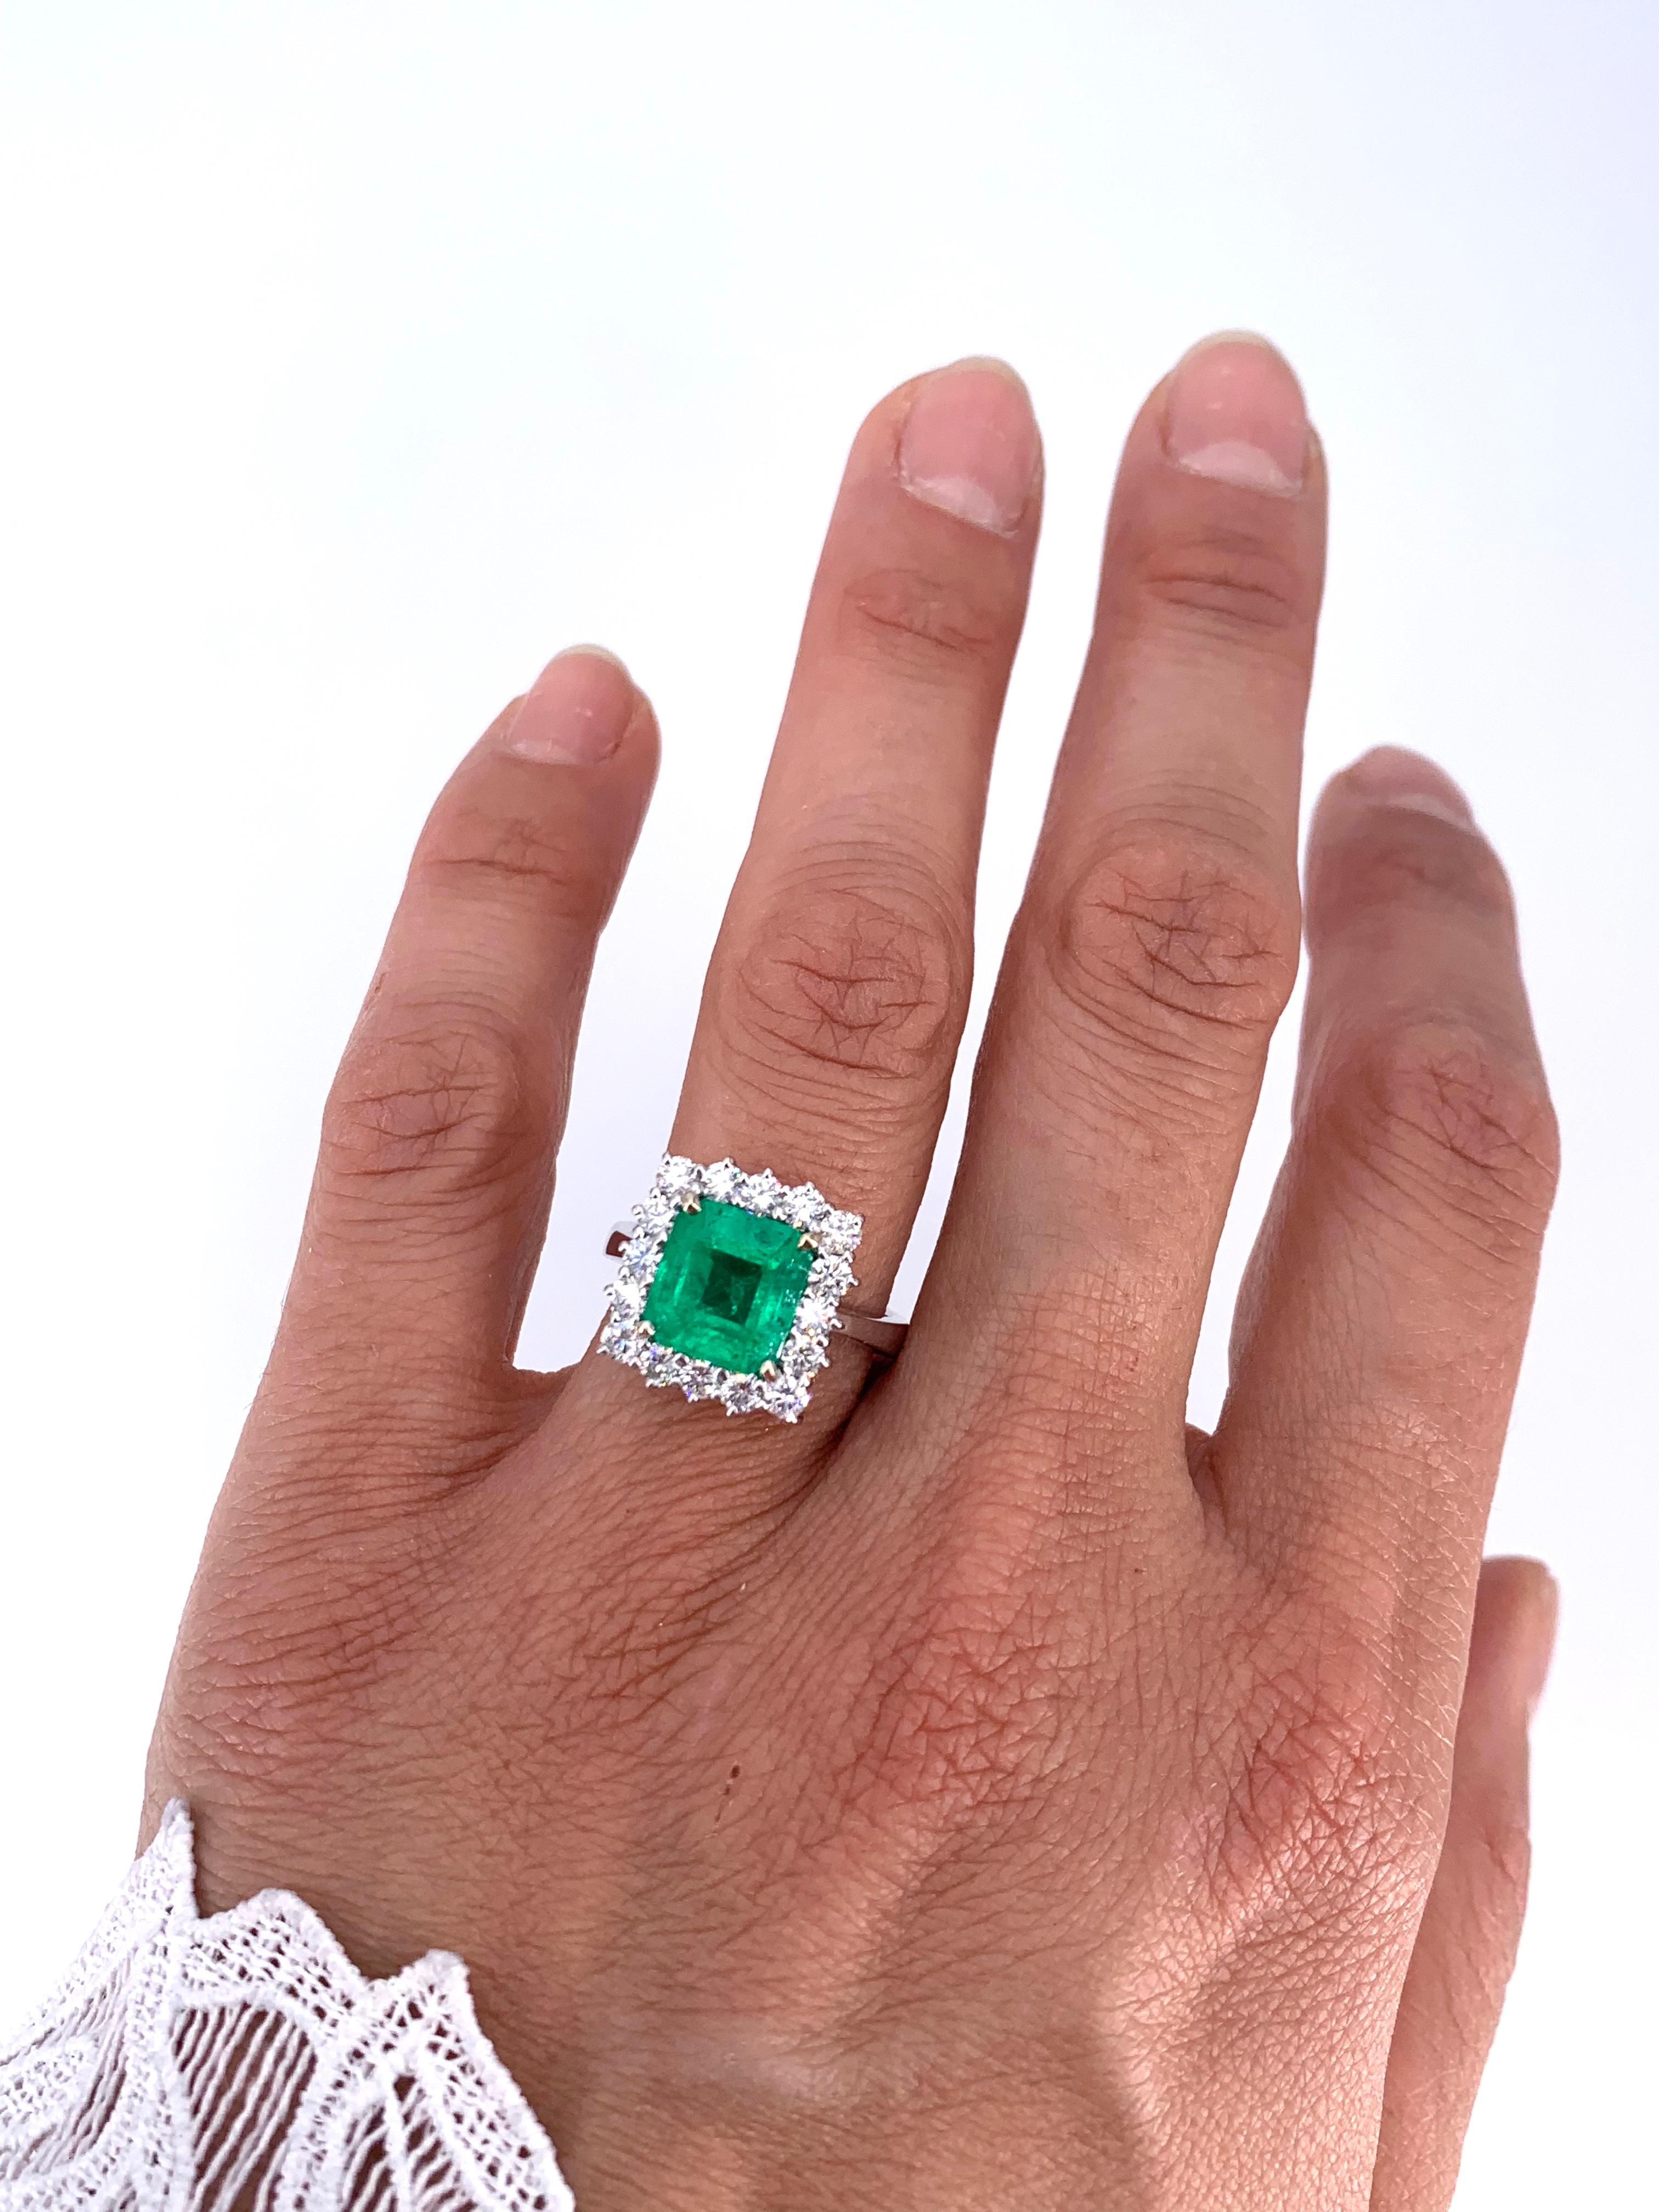 Women's 3.26 Carat Colombian Emerald and 1.02 Carat 18 Kt White Gold Halo Diamond Ring 